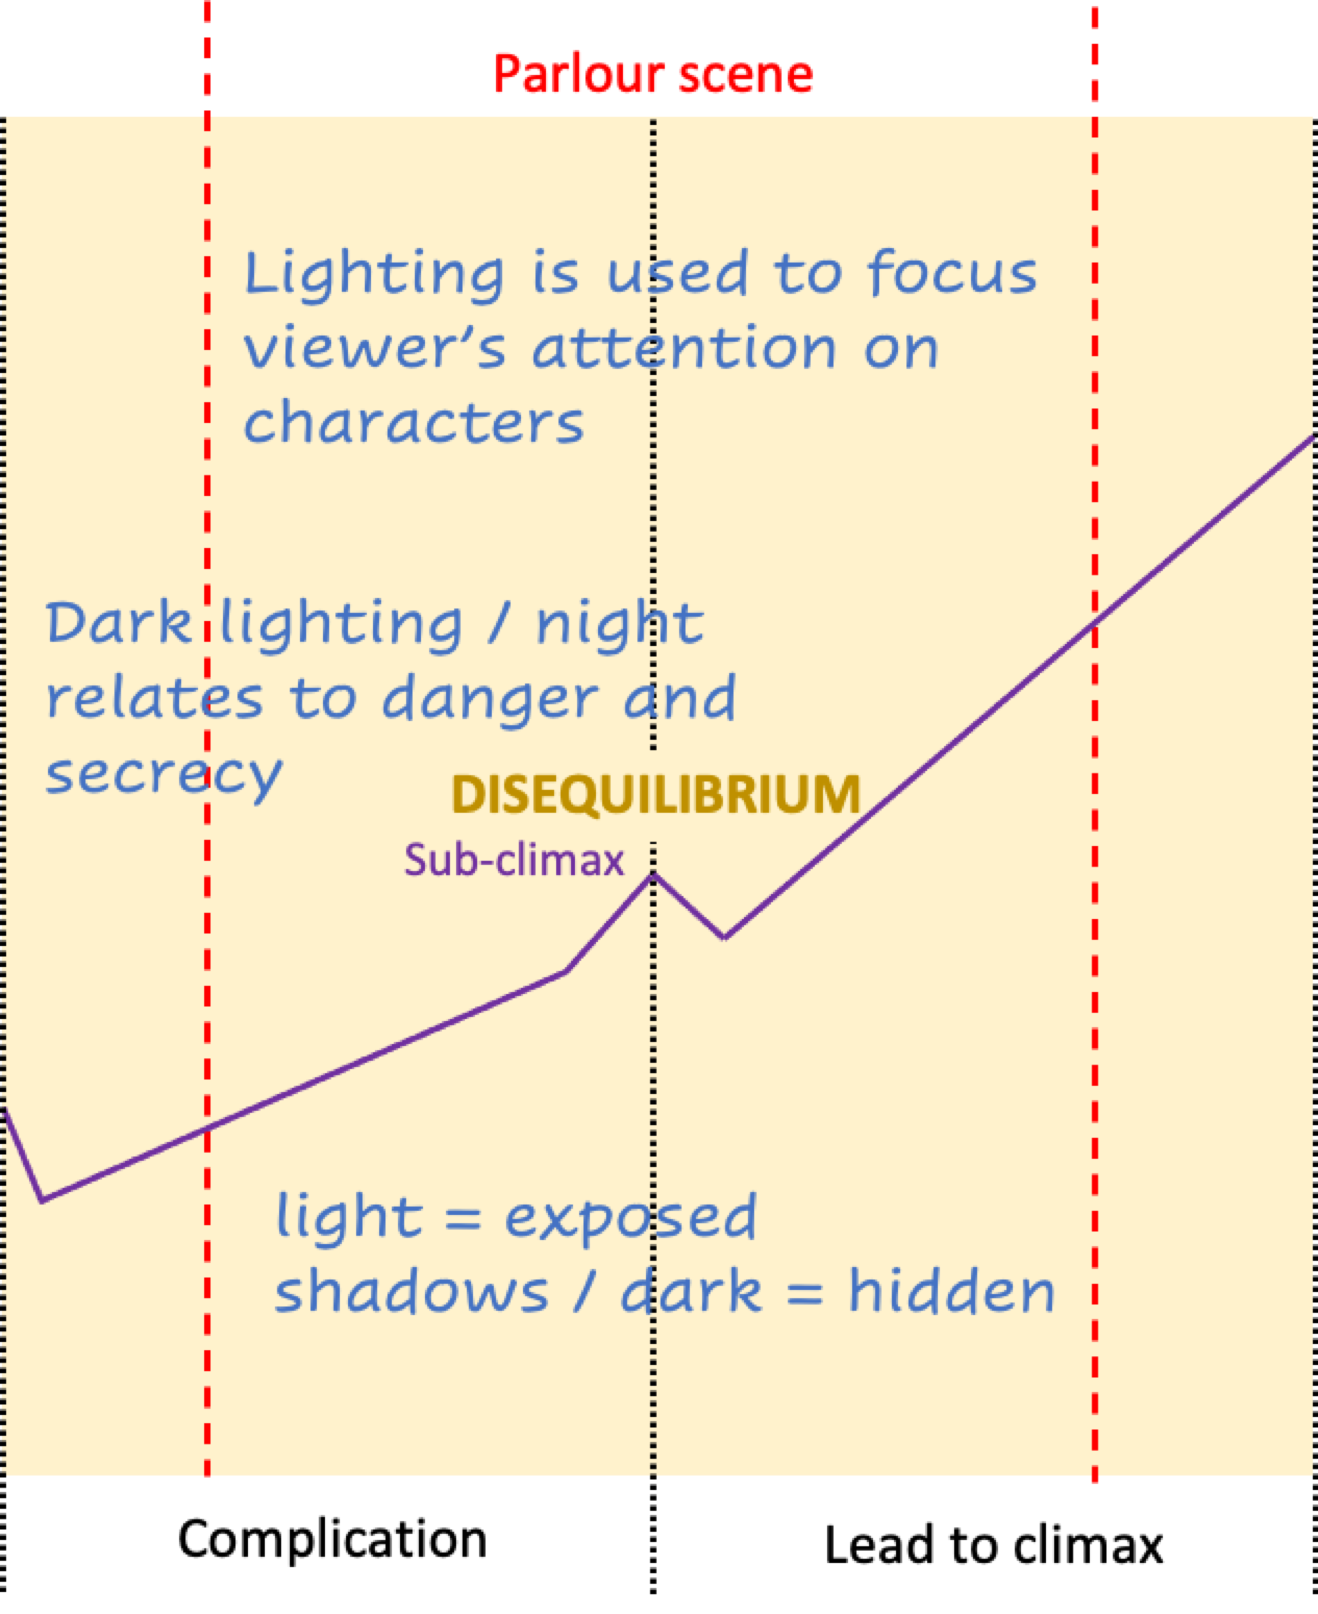 a completed section of a narrative arc diagram for the parlour scene from Hitchcock's Pscyho. The student's responses focus on the use of lighting. The student has written: “lighting is used to focus viewer's attention on characters,” “dark lighting/night relates to danger and secrecy,” and “light = exposed; shadows / dark = hidden”